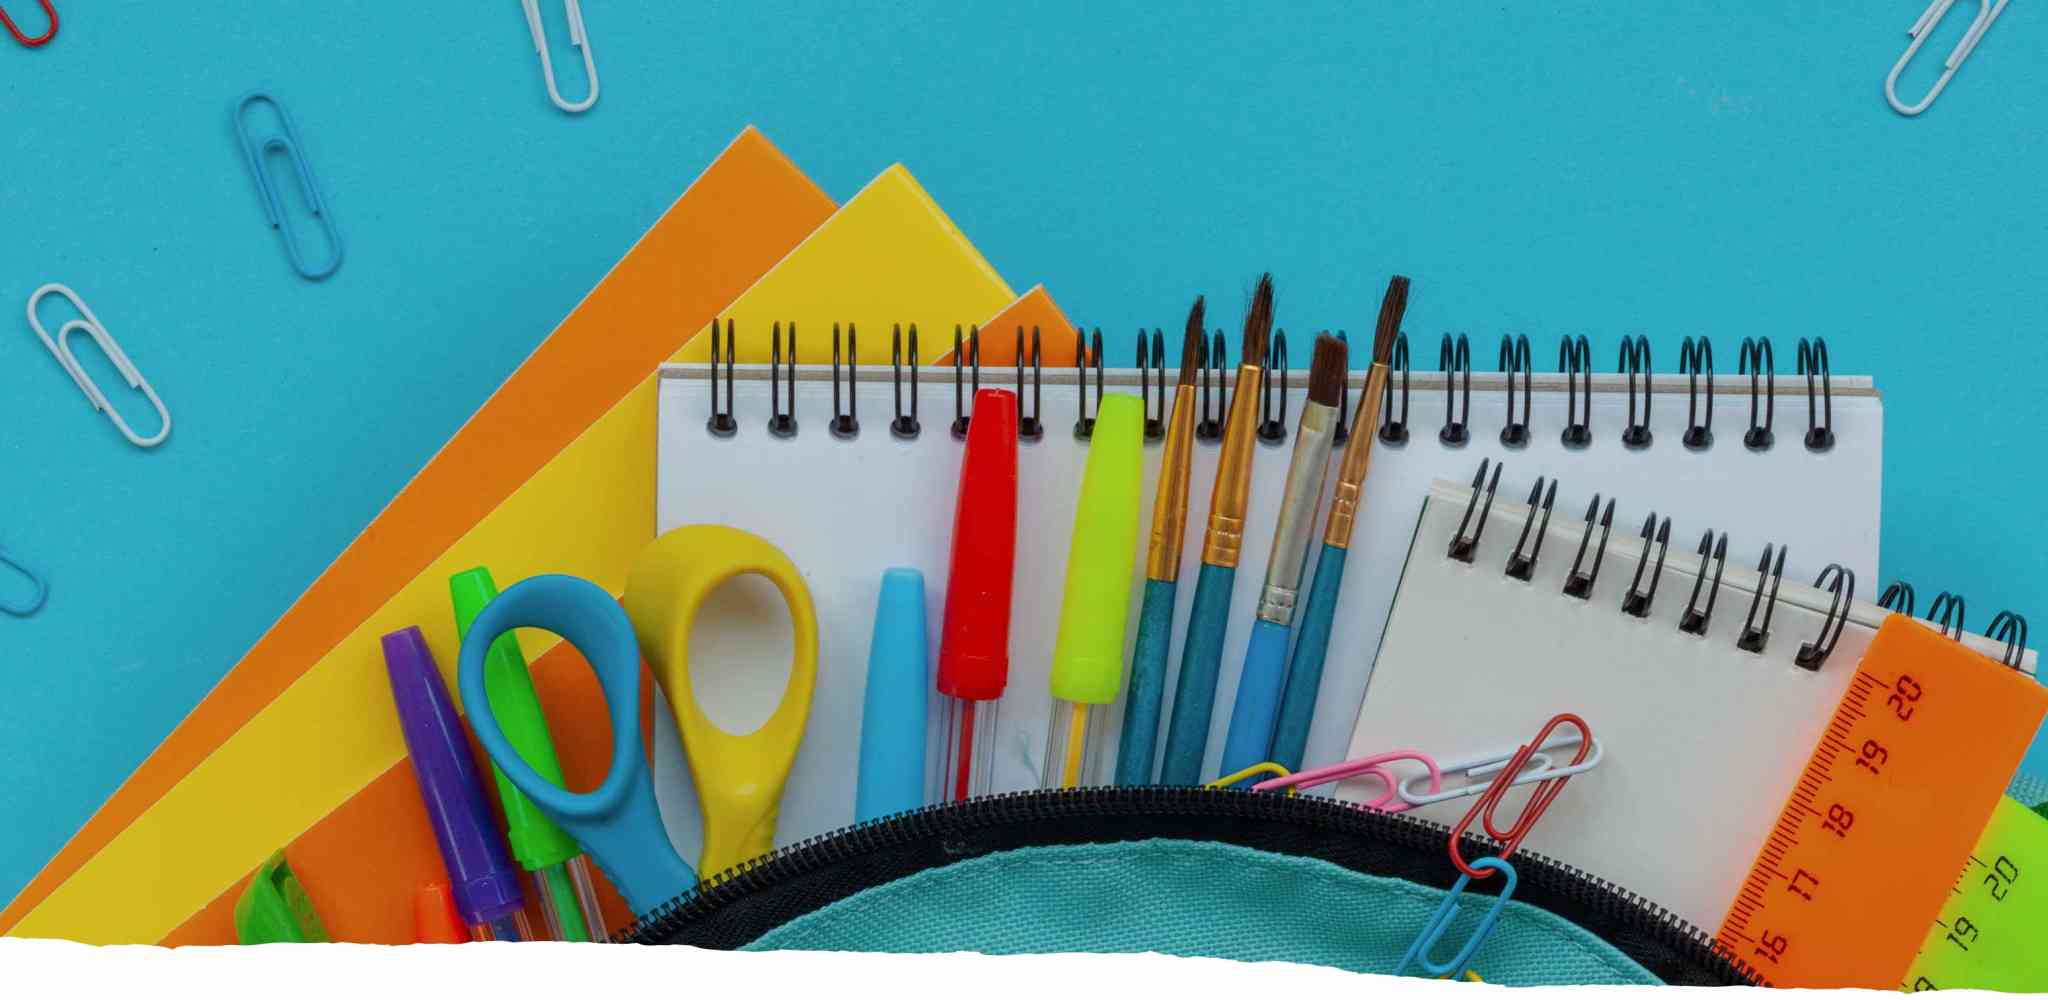 School supplies spilling out of a backpack, such as scissors, paperclips, pens, paintbrushes and a notebook.